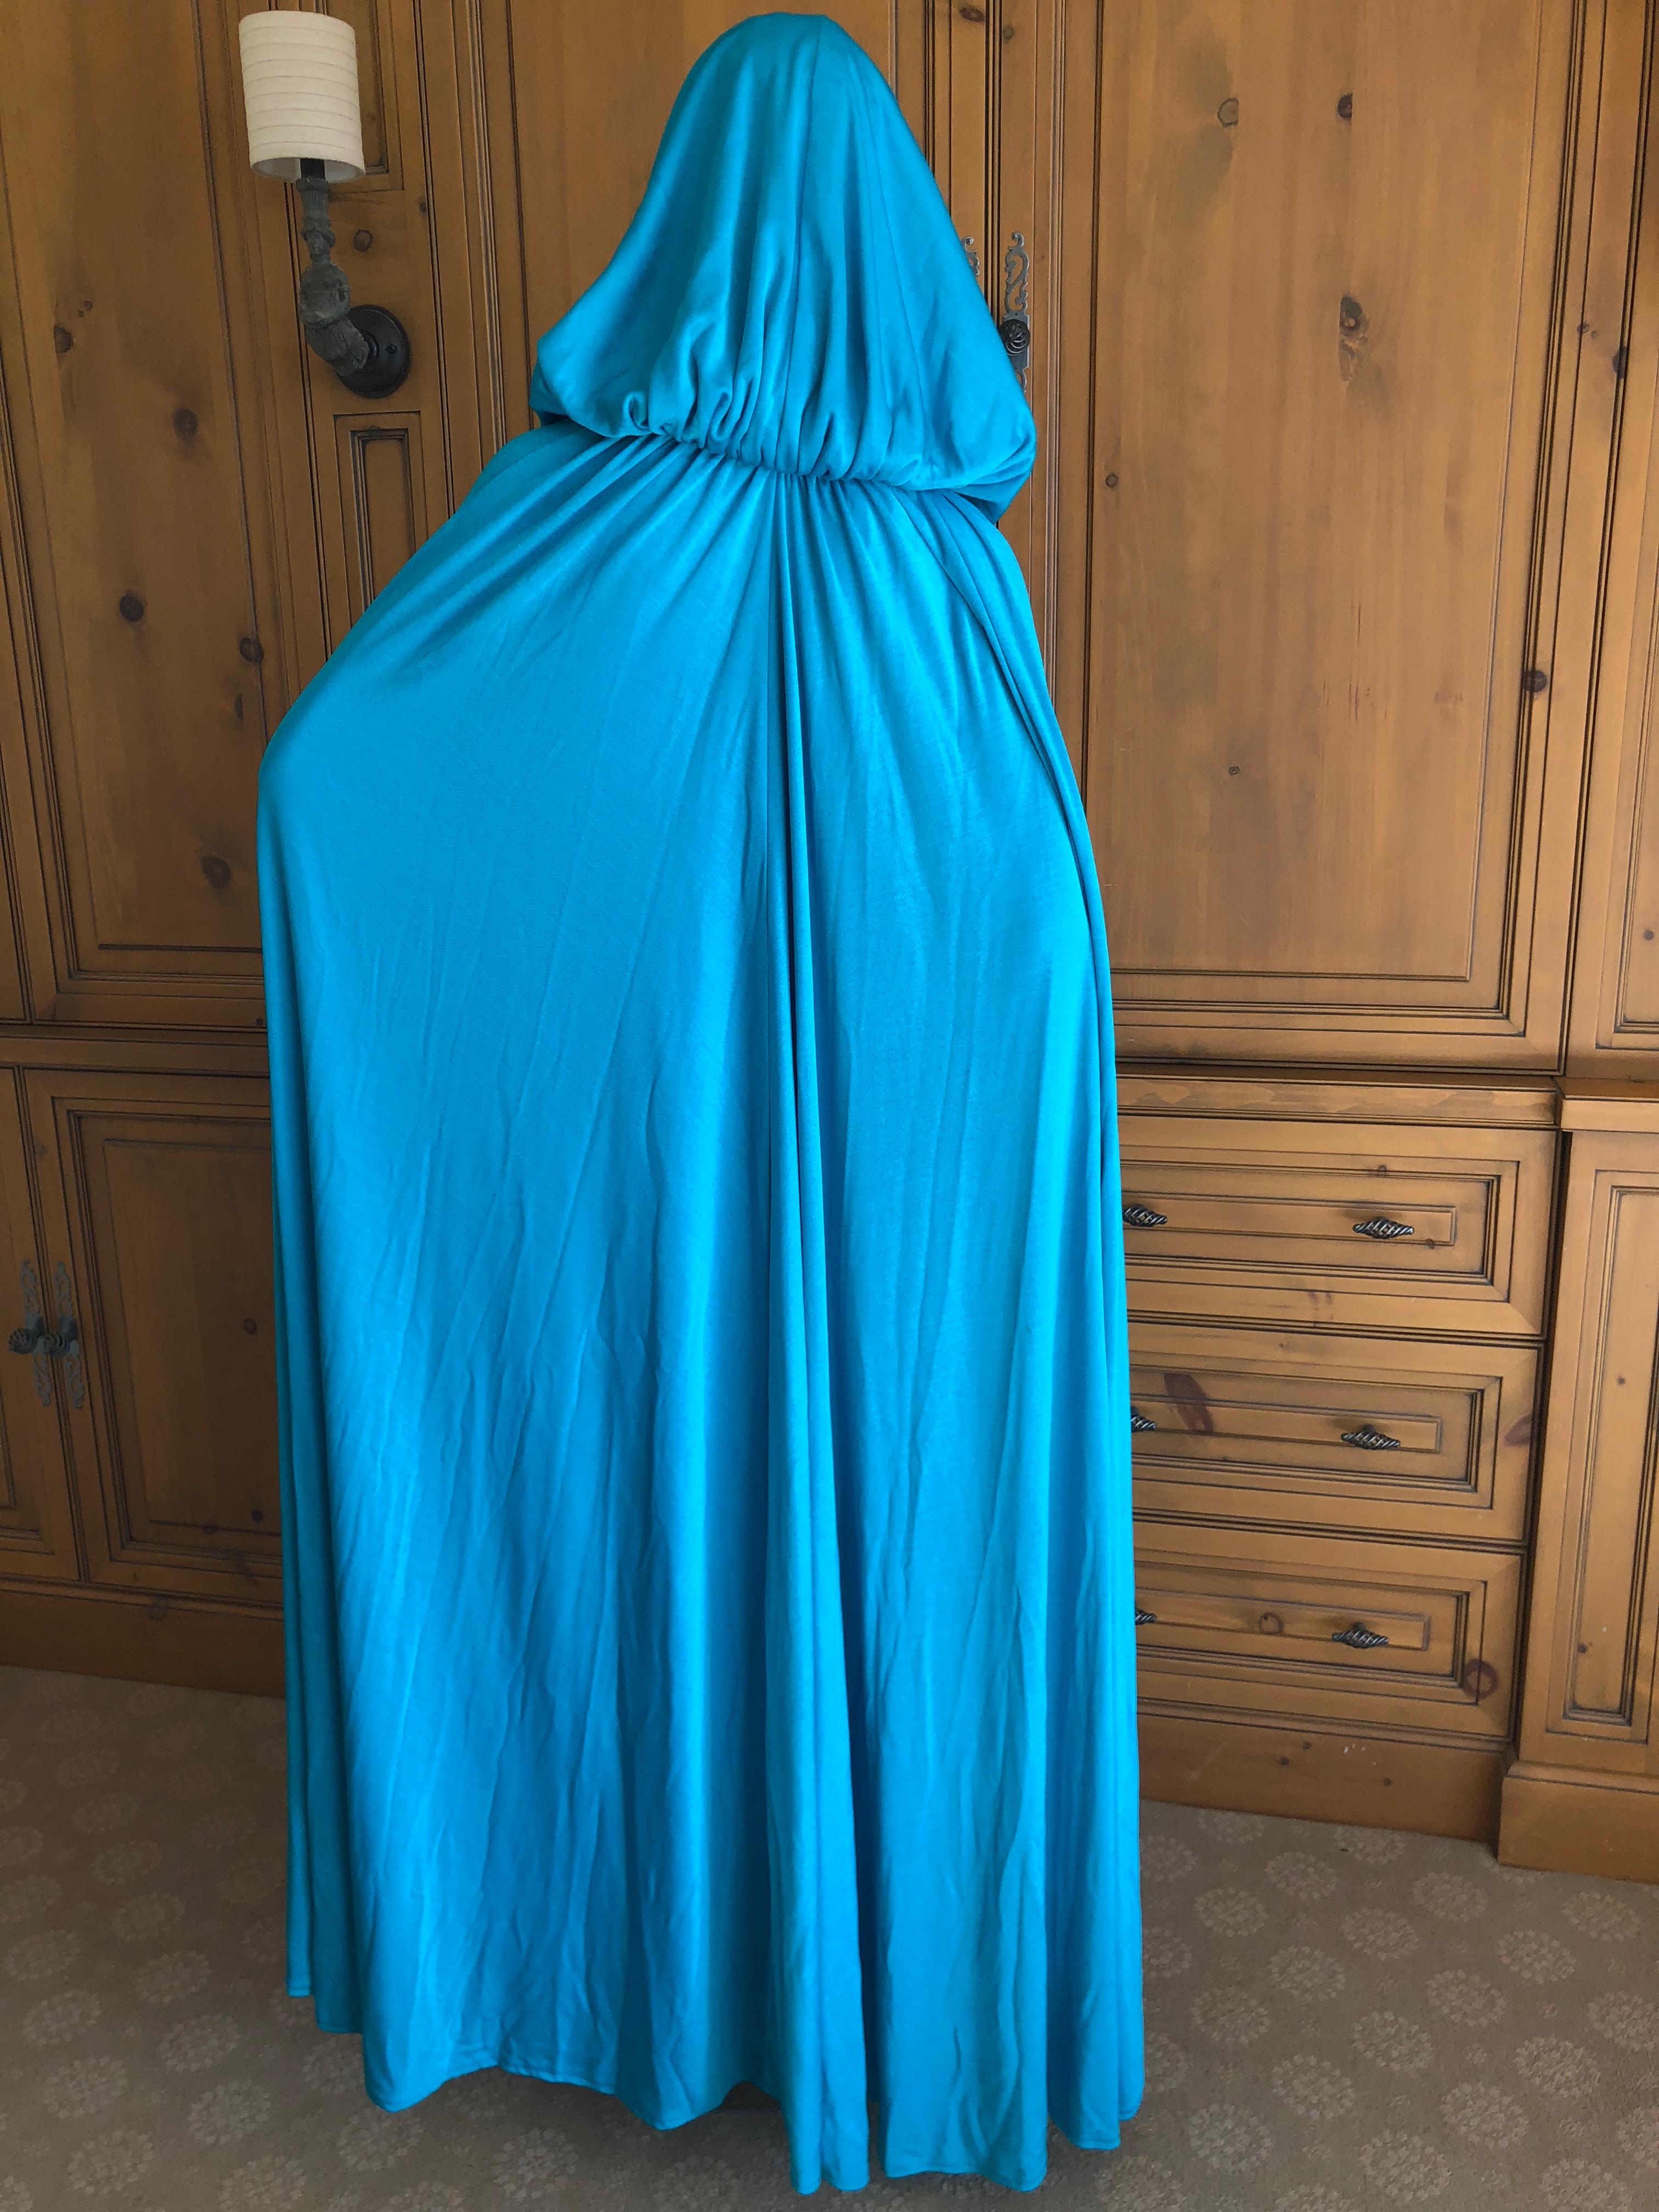 Loris Azzaro Couture 1970s Sheer Sequin Accented Turquoise Blue Dress and Cape 7